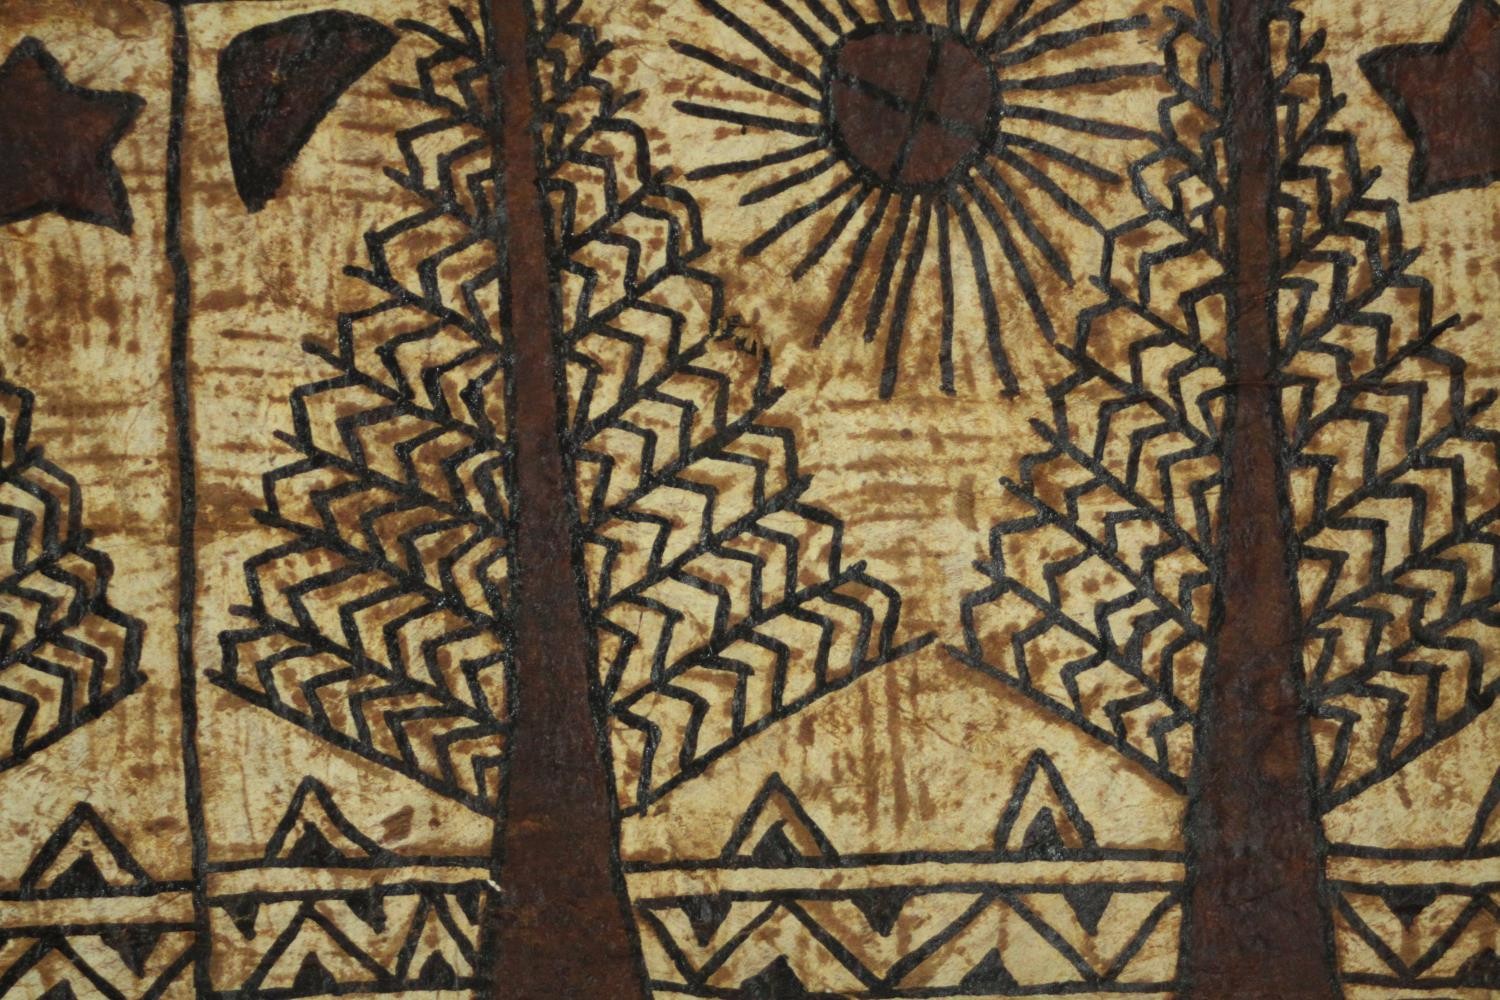 Two large Tonganese Tapa cloth wall hangings, one depicting animals and one depicting stylised trees - Image 5 of 10